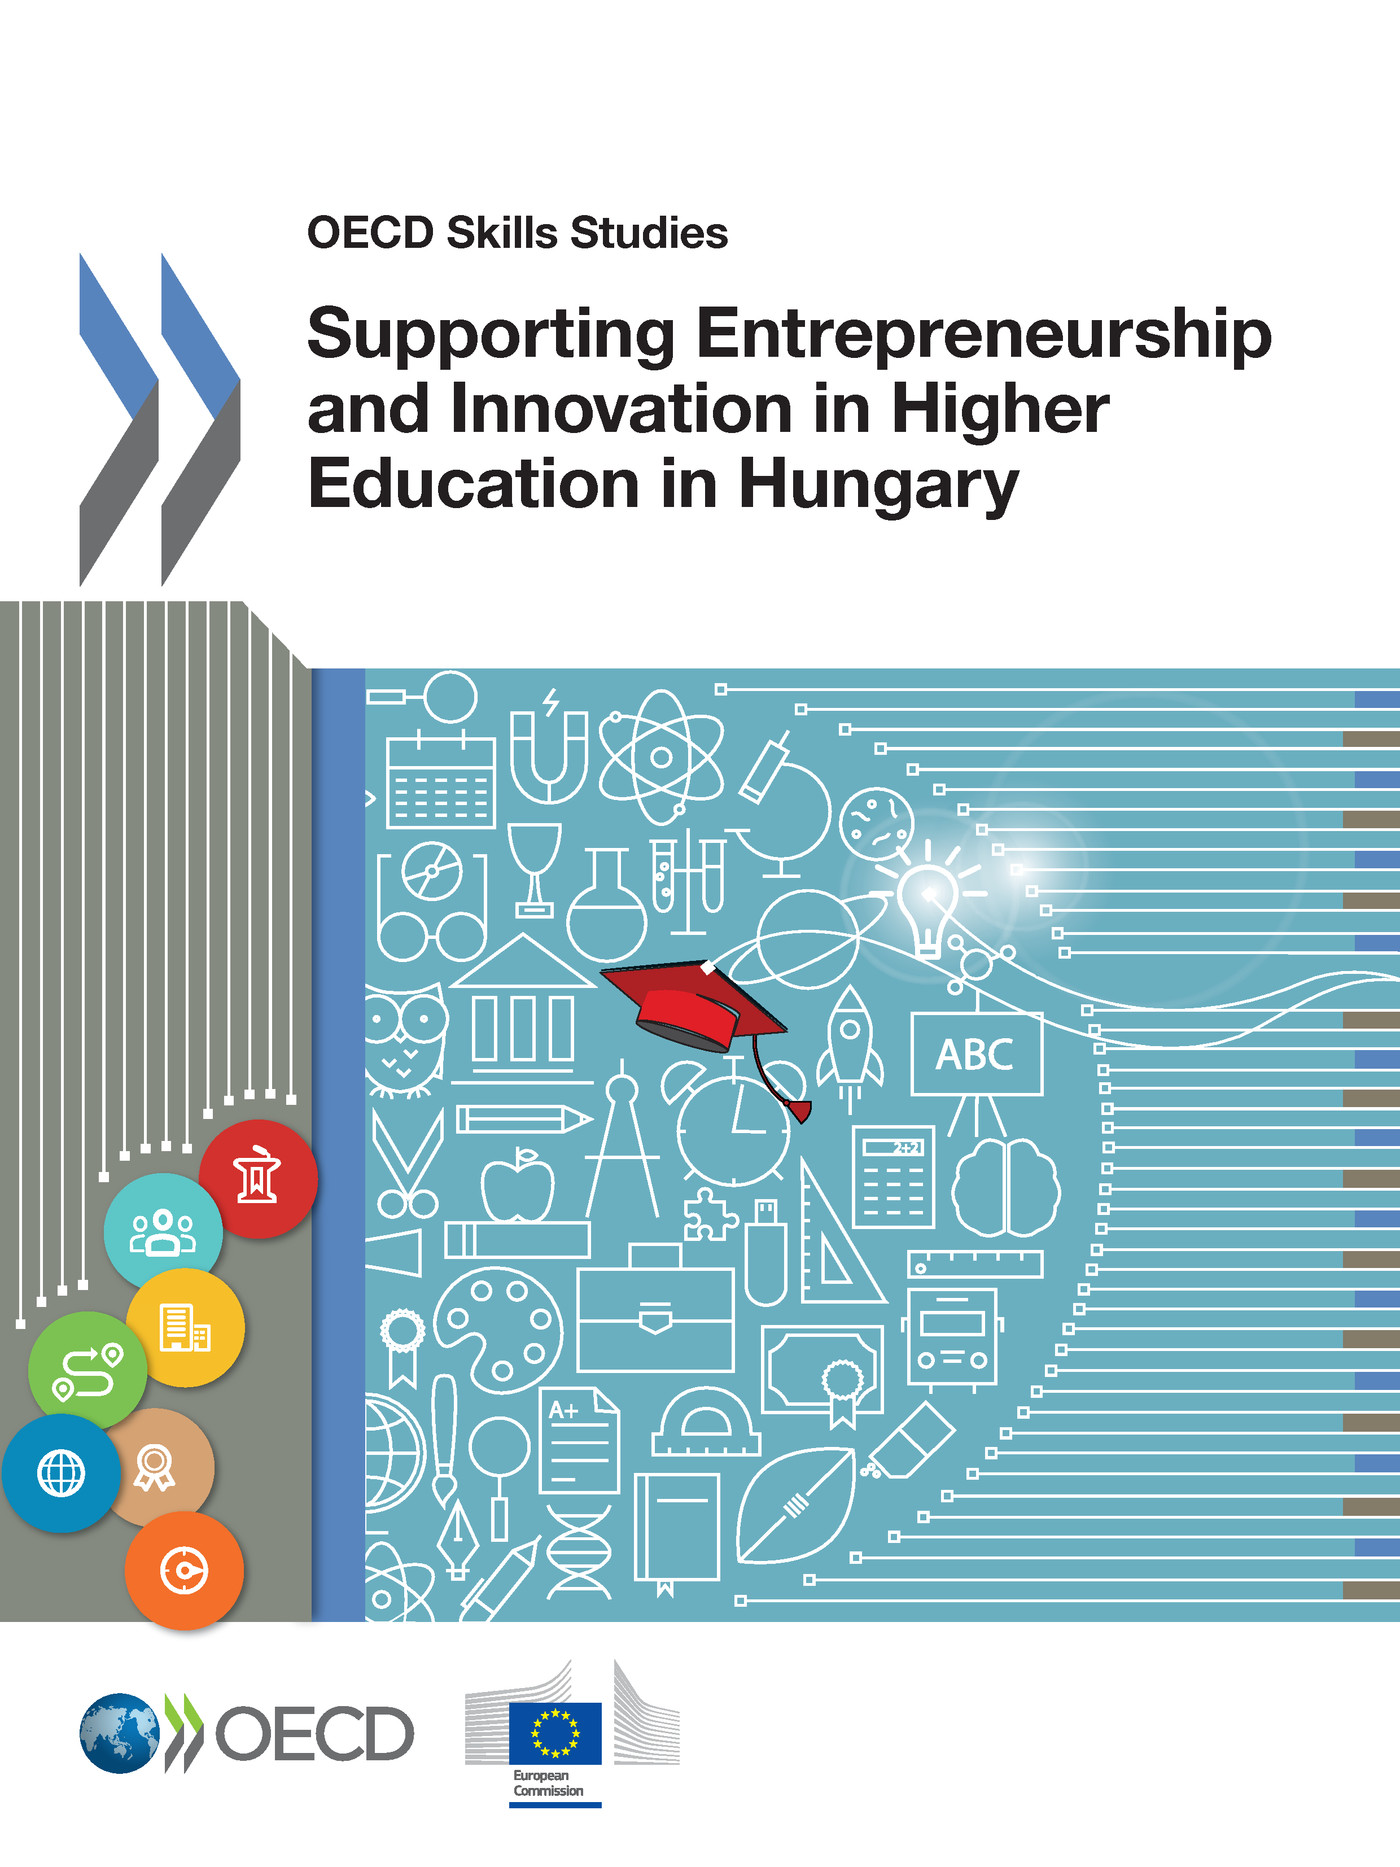 Supporting Entrepreneurship and Innovation in Higher Education in Hungary -  Collectif - OCDE / OECD